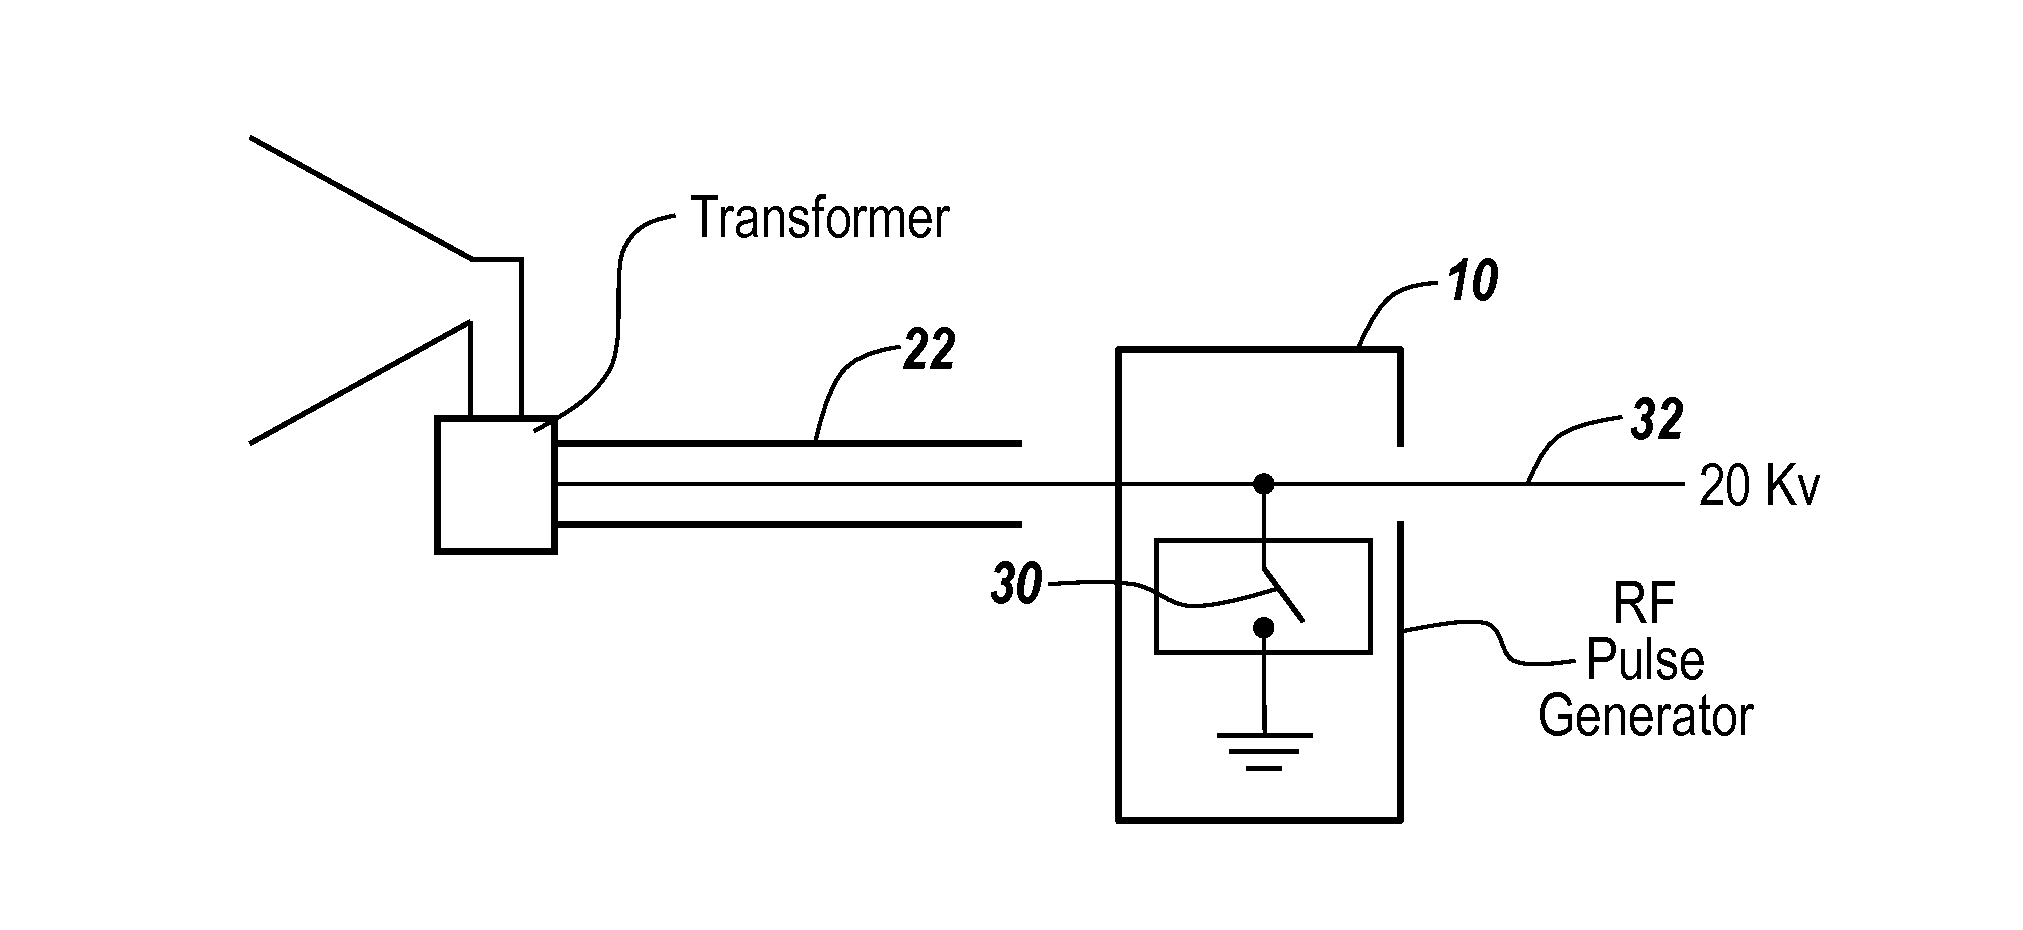 Generation of Flexible High Power Pulsed Waveforms